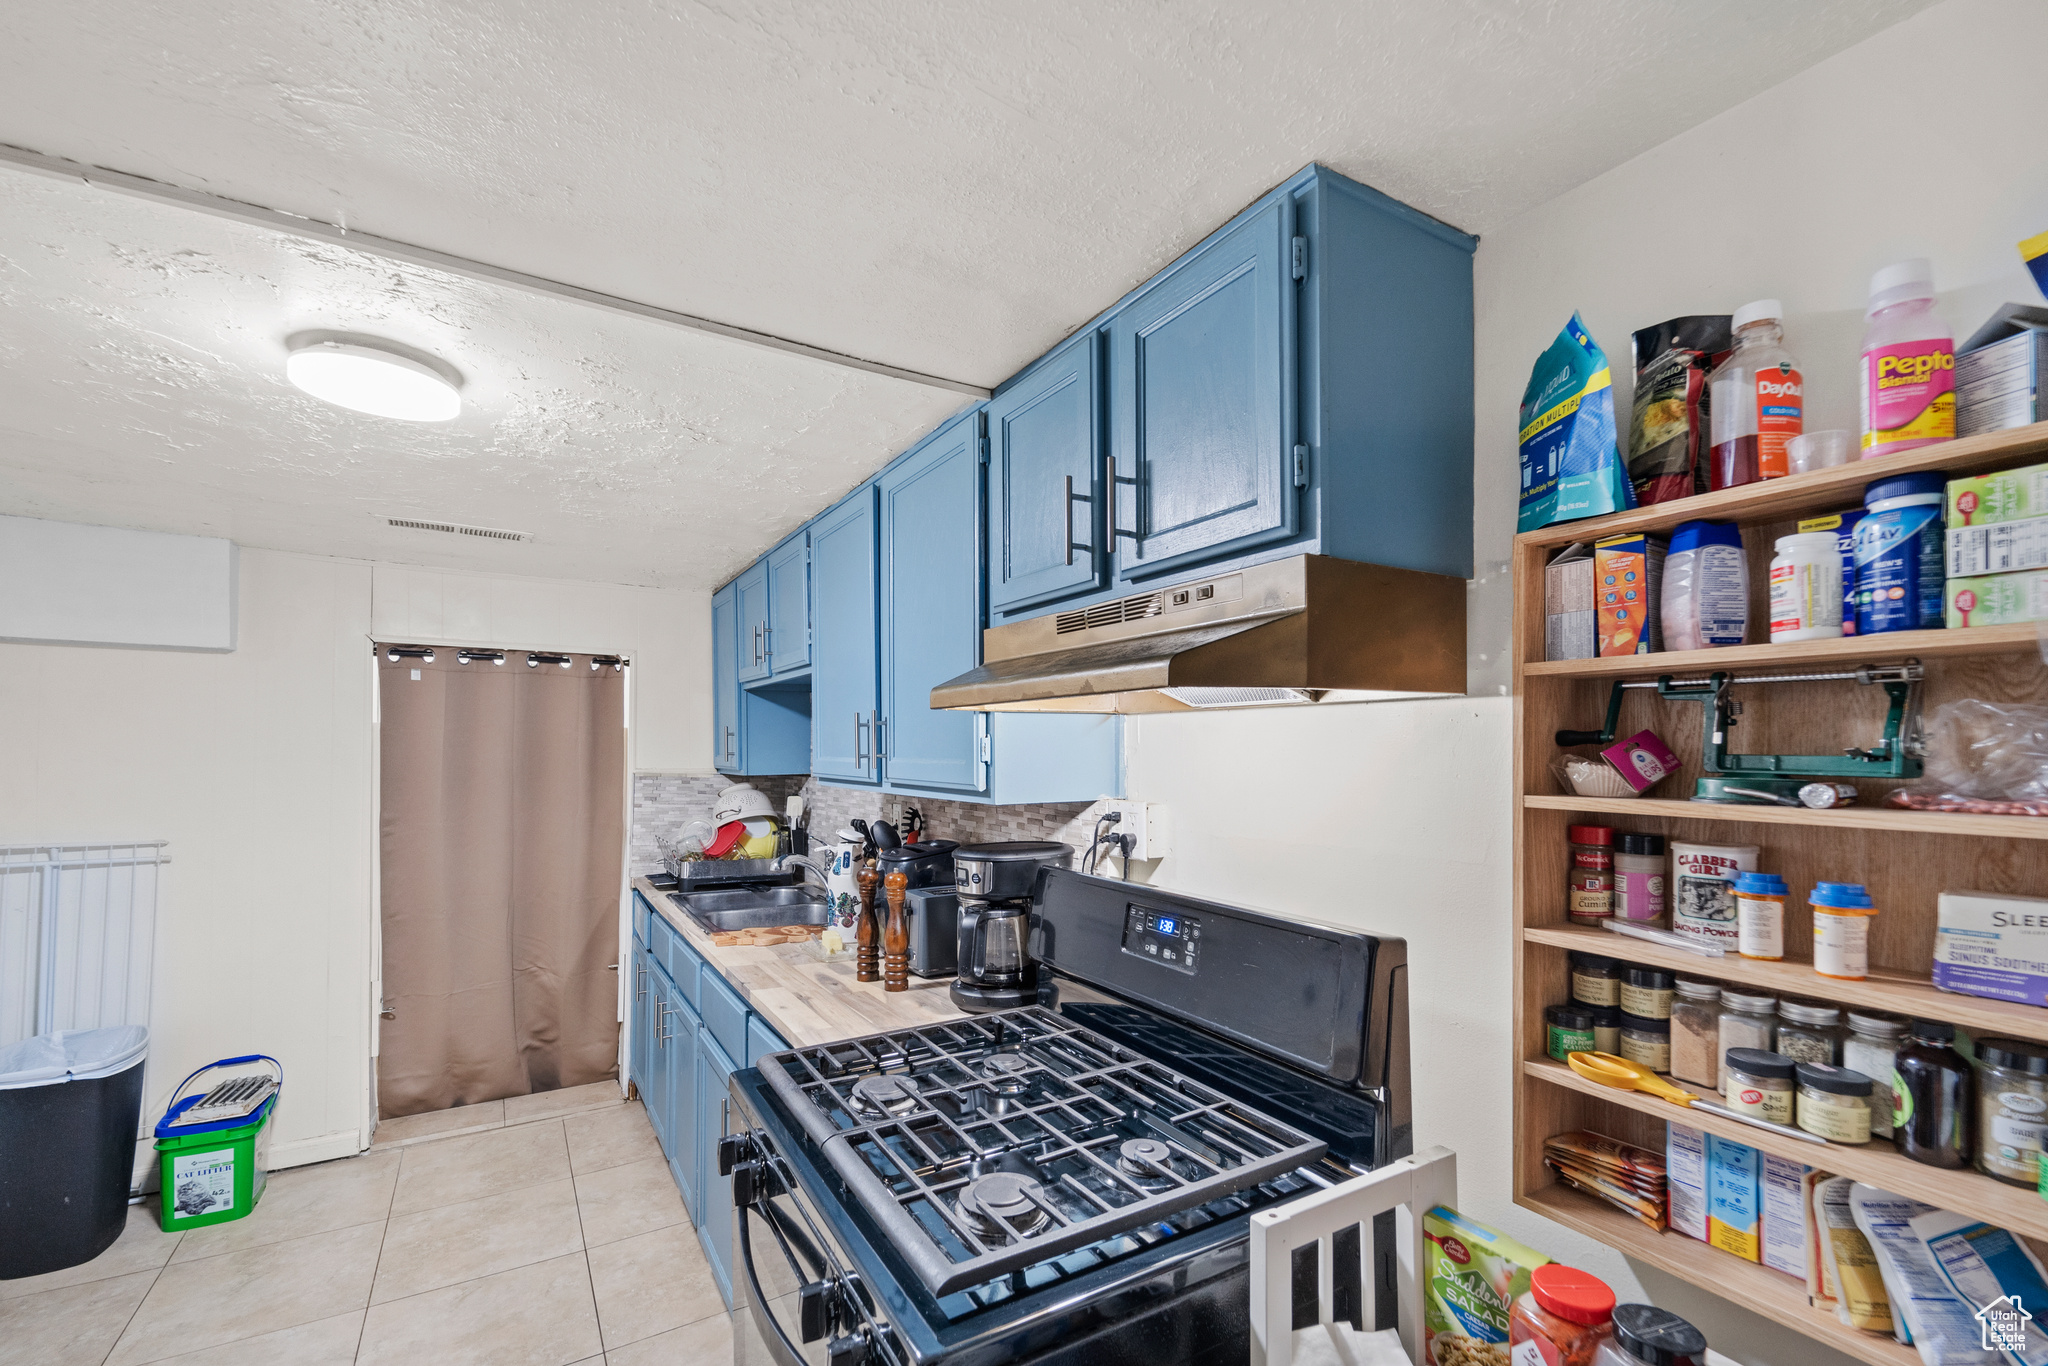 Kitchen featuring a textured ceiling, blue cabinets, light tile flooring, and range with gas stovetop